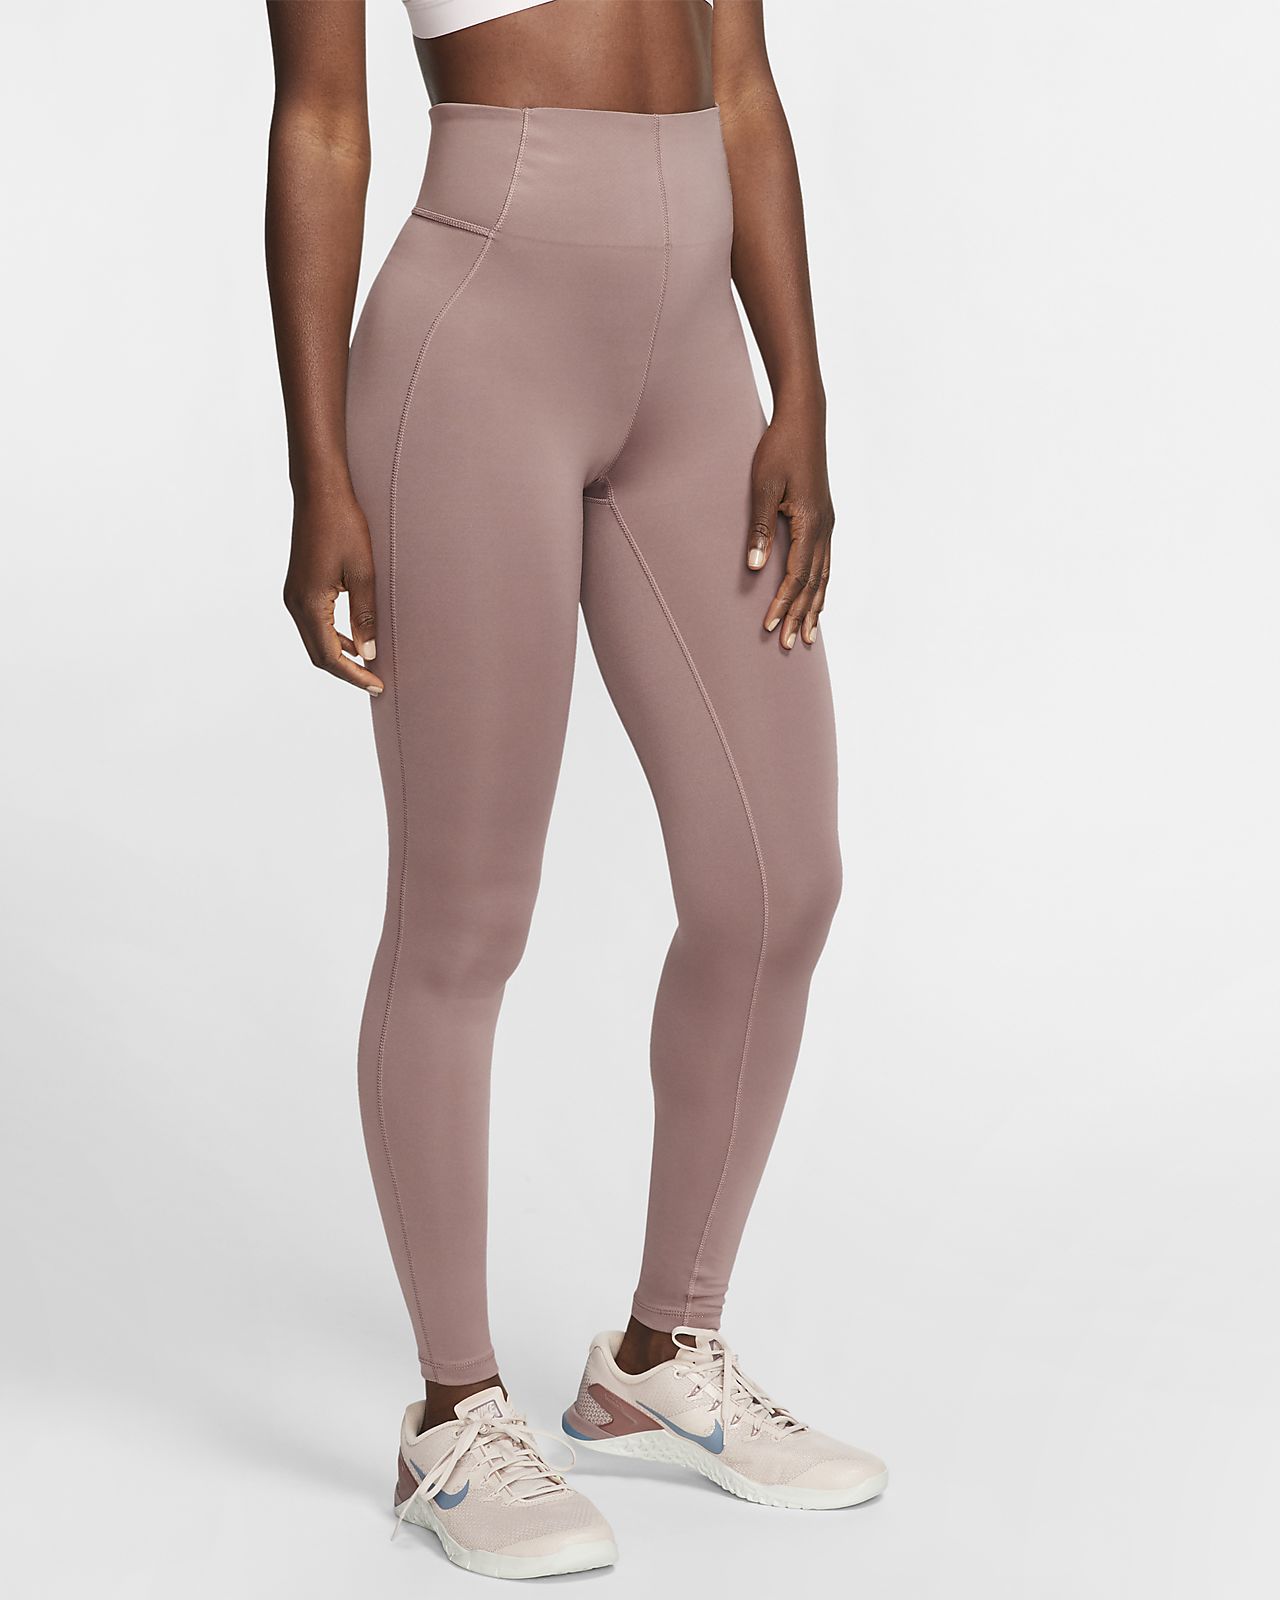 nike one women's sculpt victory training tights